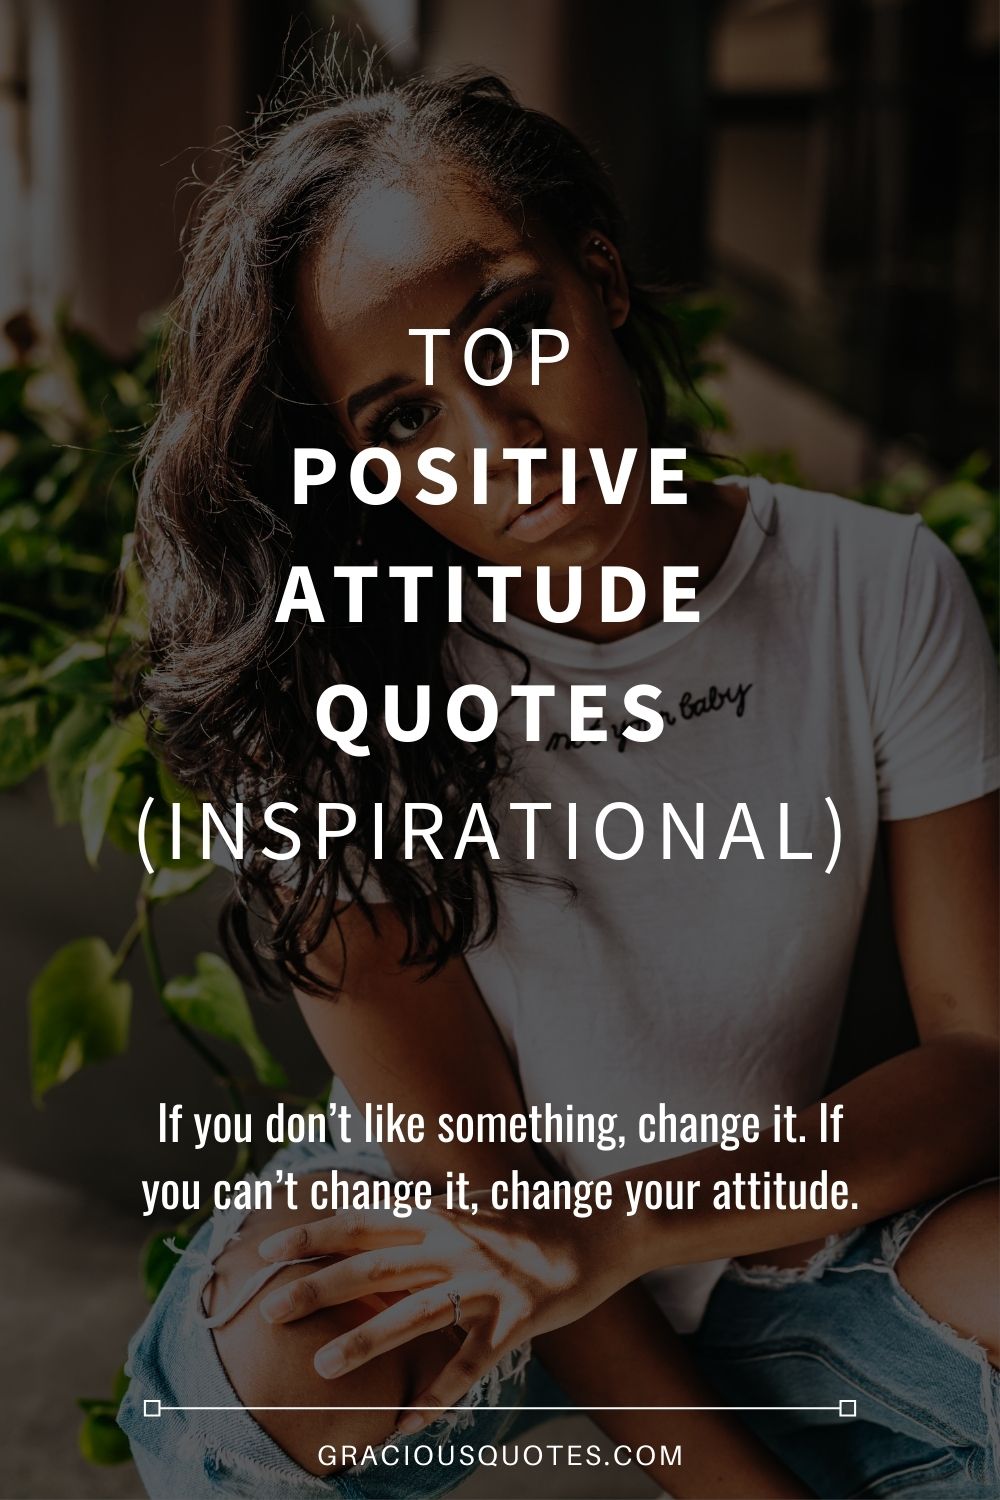 quotes about attitude towards others